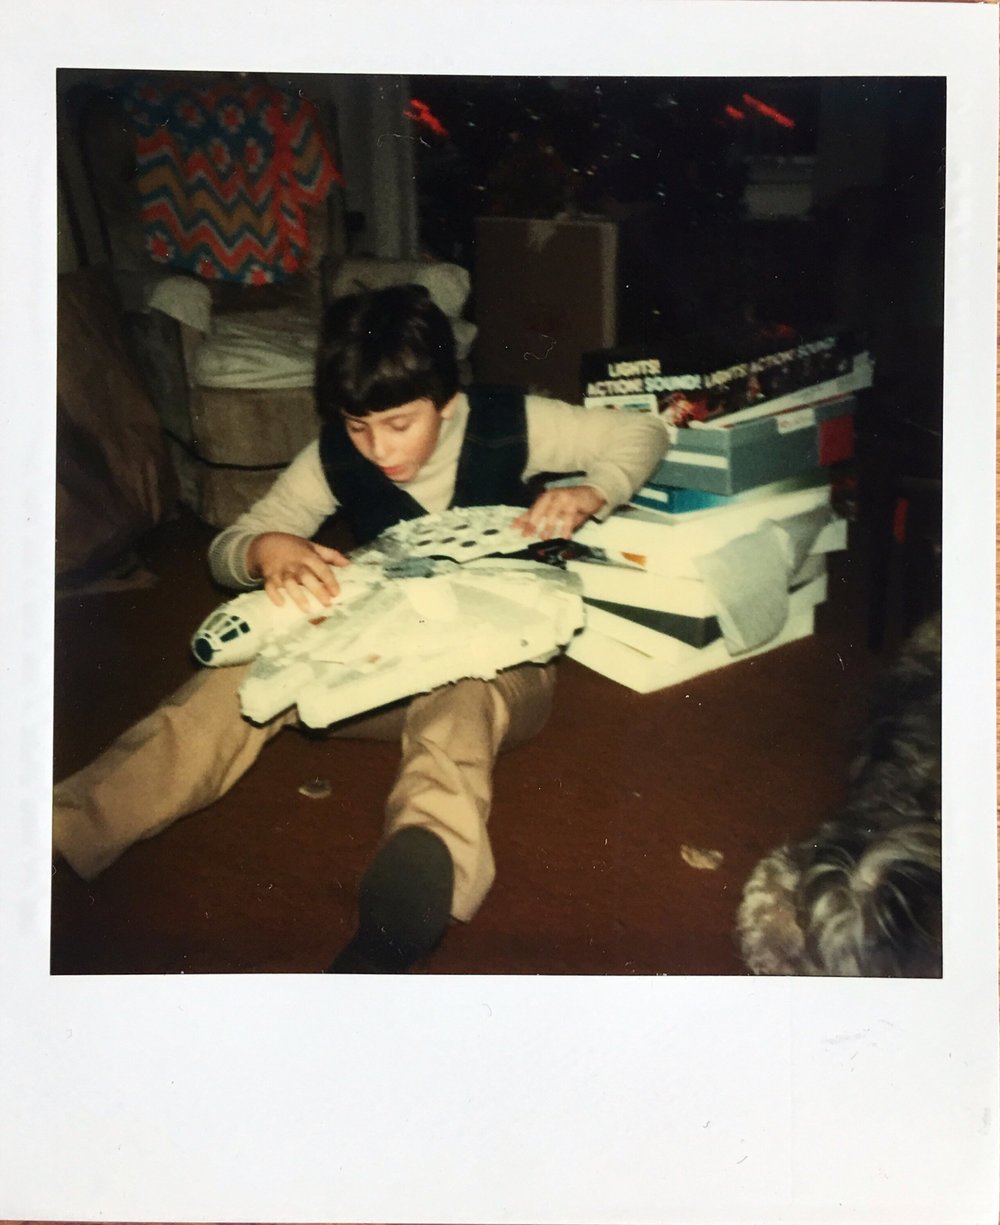 Another favorite of mine, a grandson opening his Christmas present. We've been in touch and I hope to reunite these Polaroids with him and other family members.